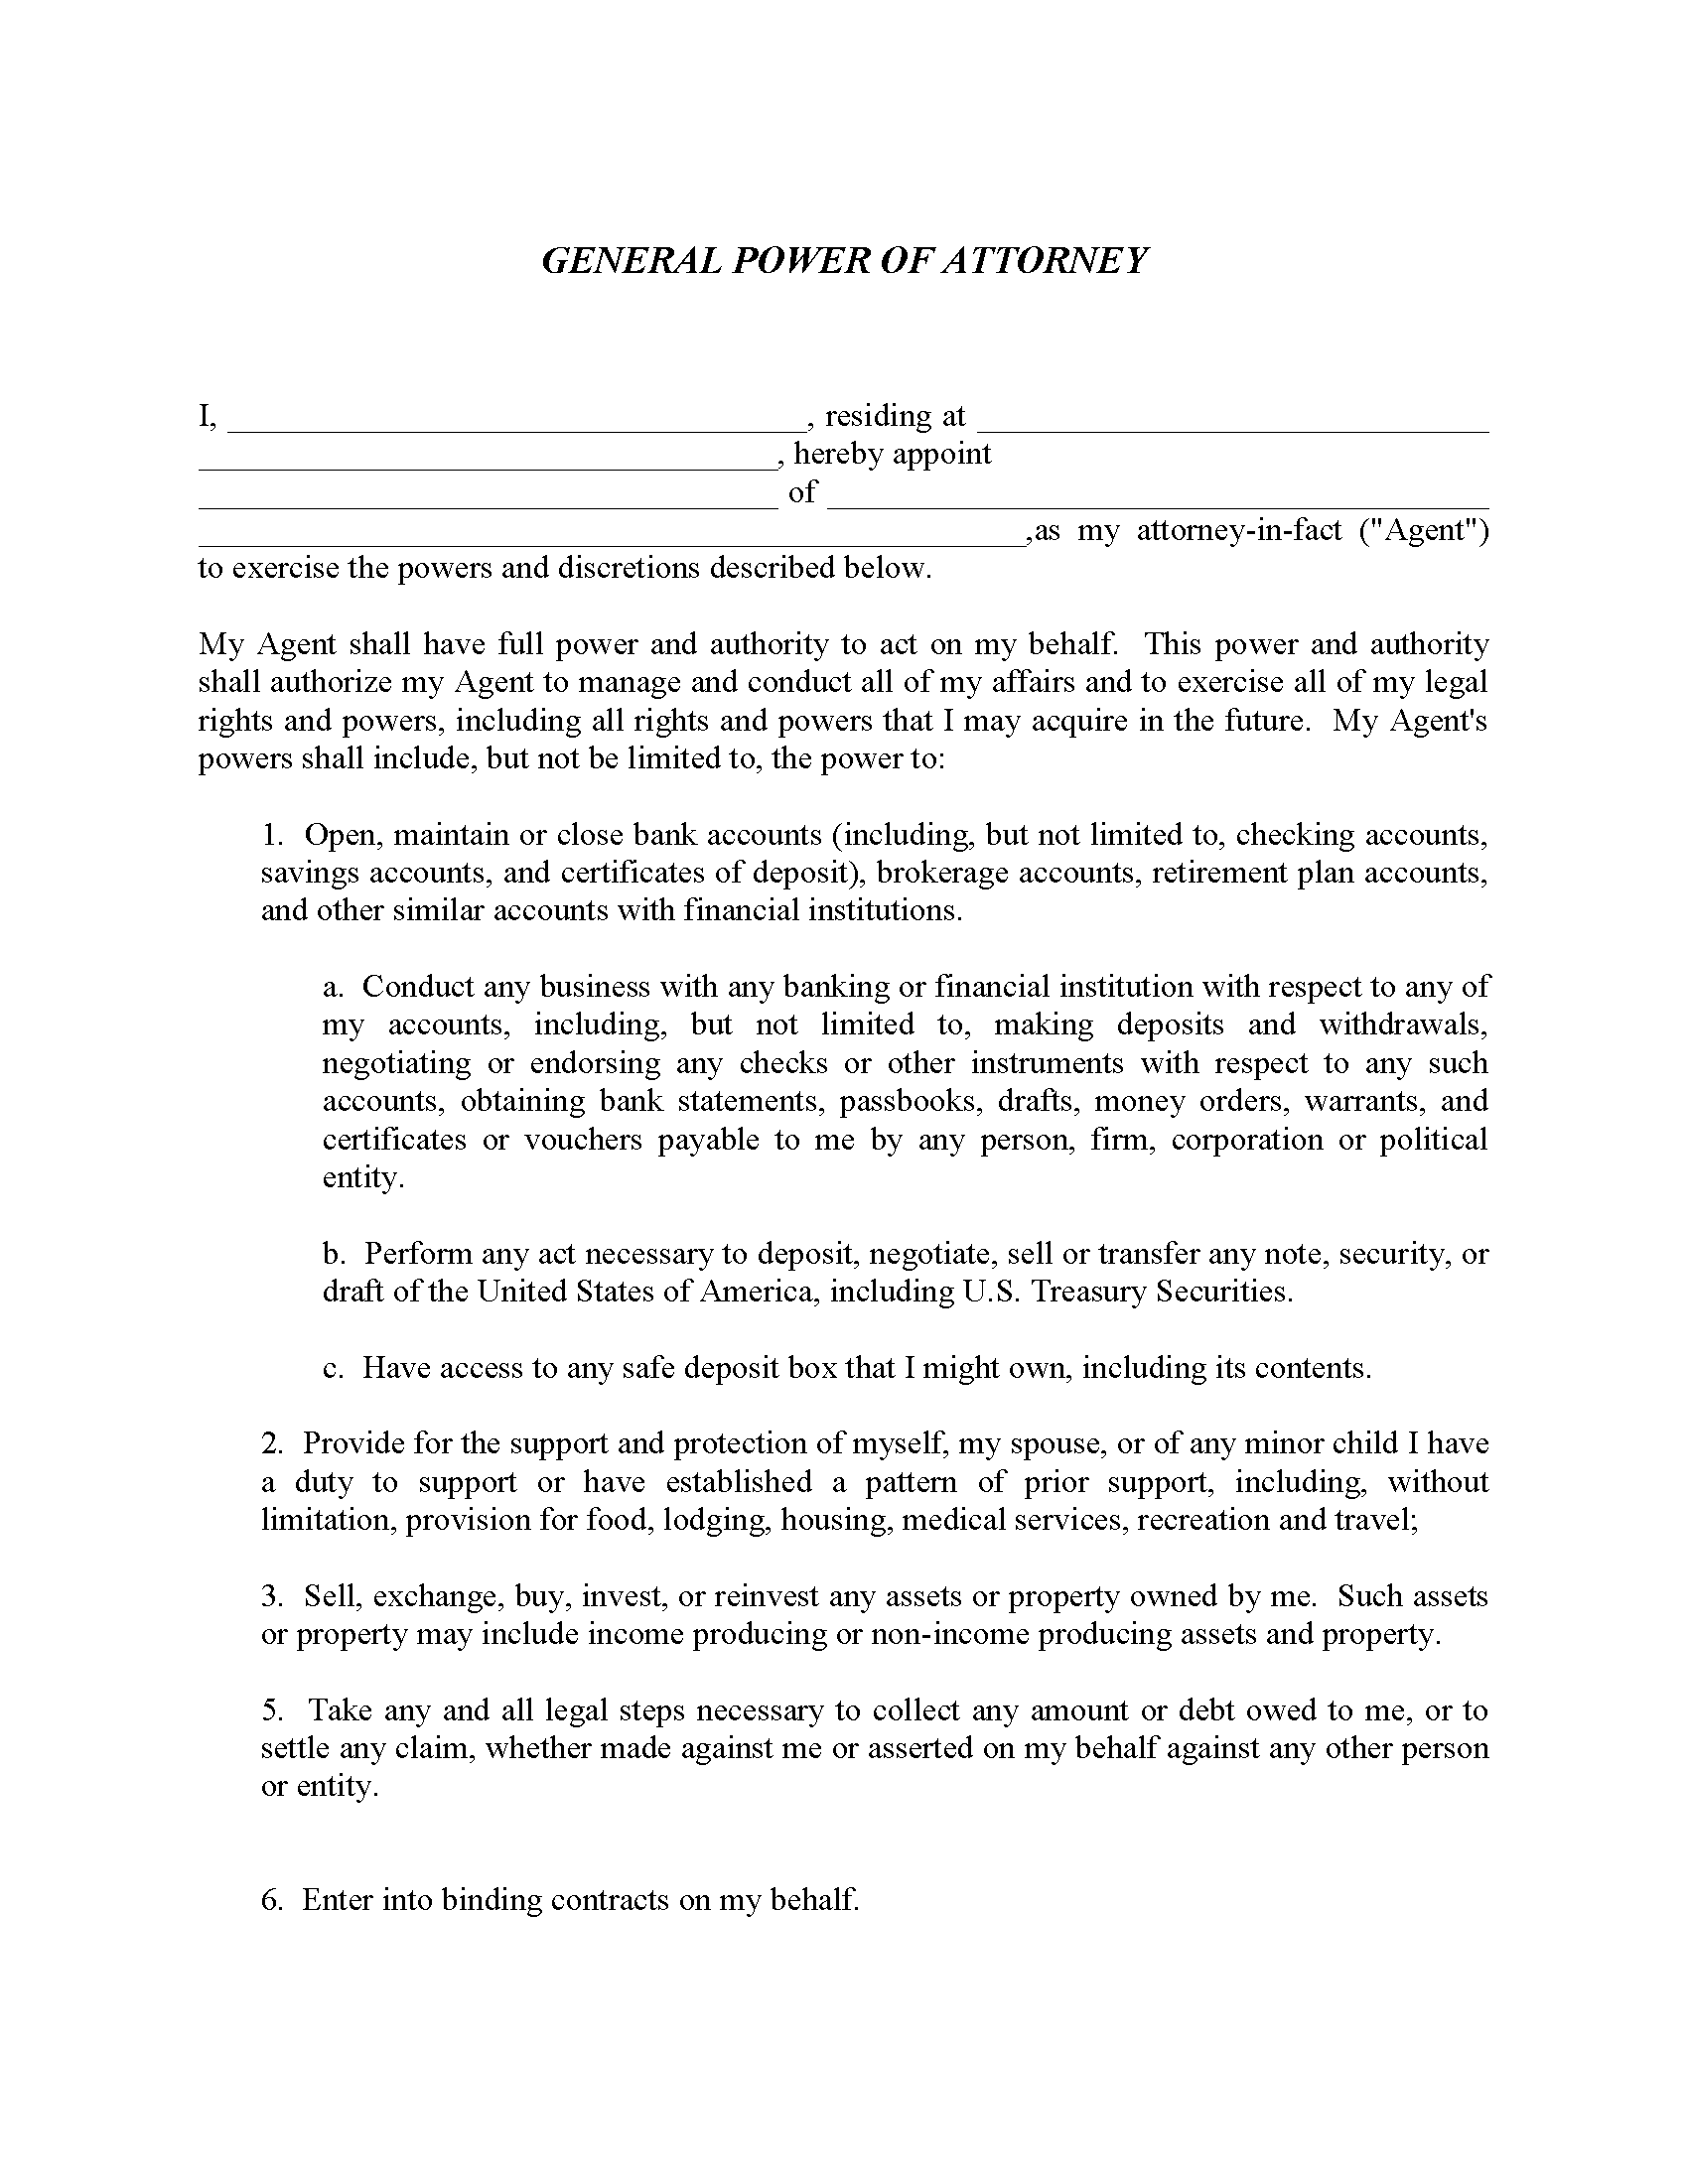 power-of-attorney-printable-forms